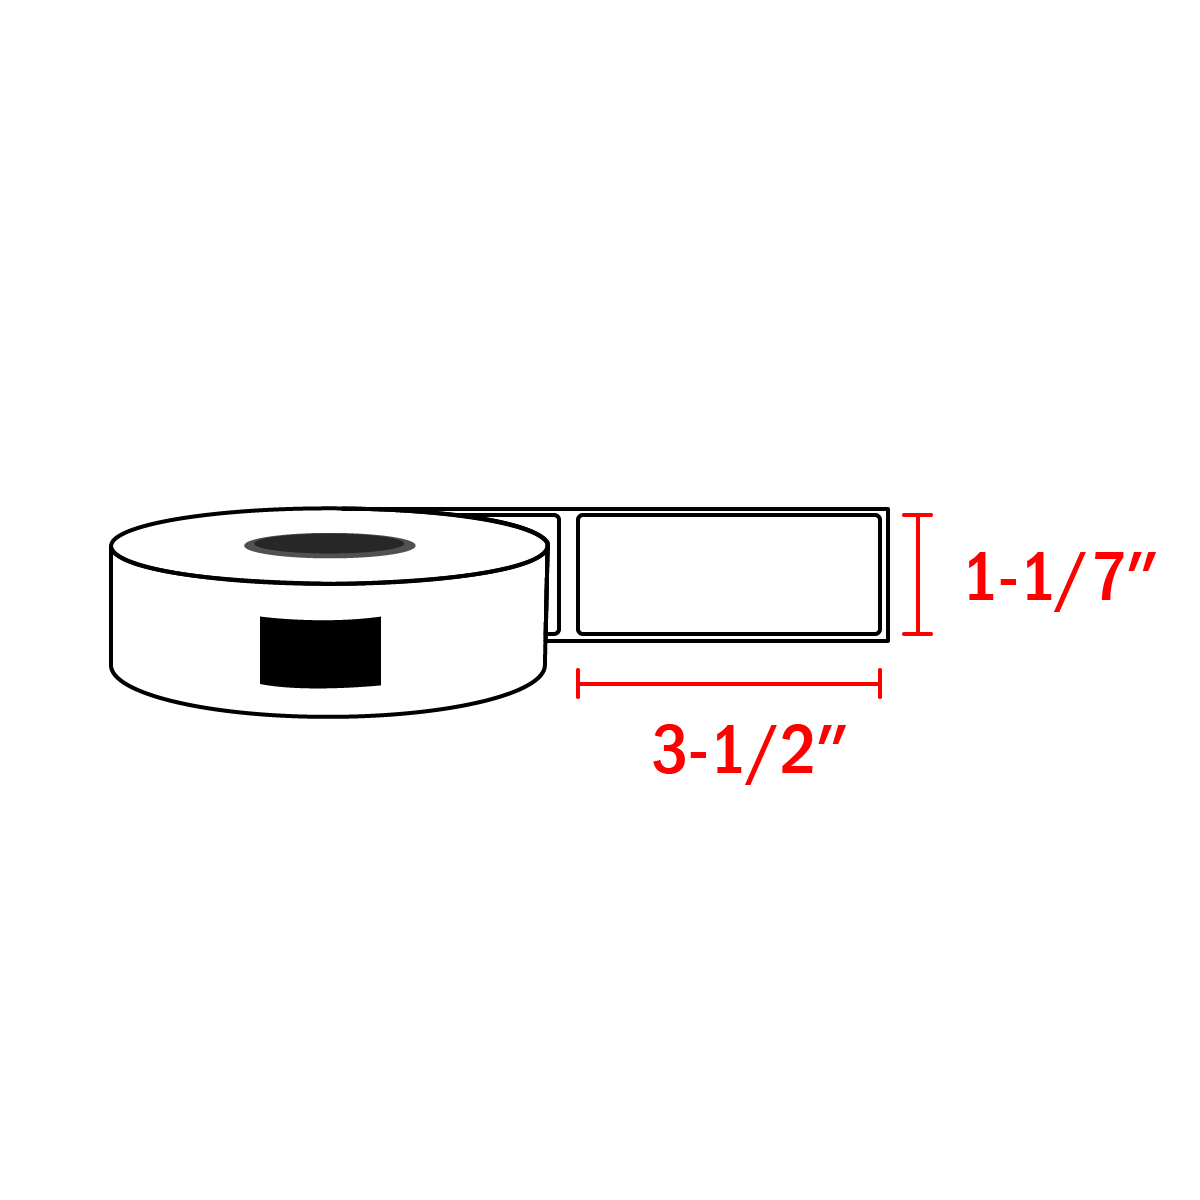 2PCS Compatible Label Tapes for Brother DK-1201 29mm x 90mm 1-1/7" x 3-1/2"